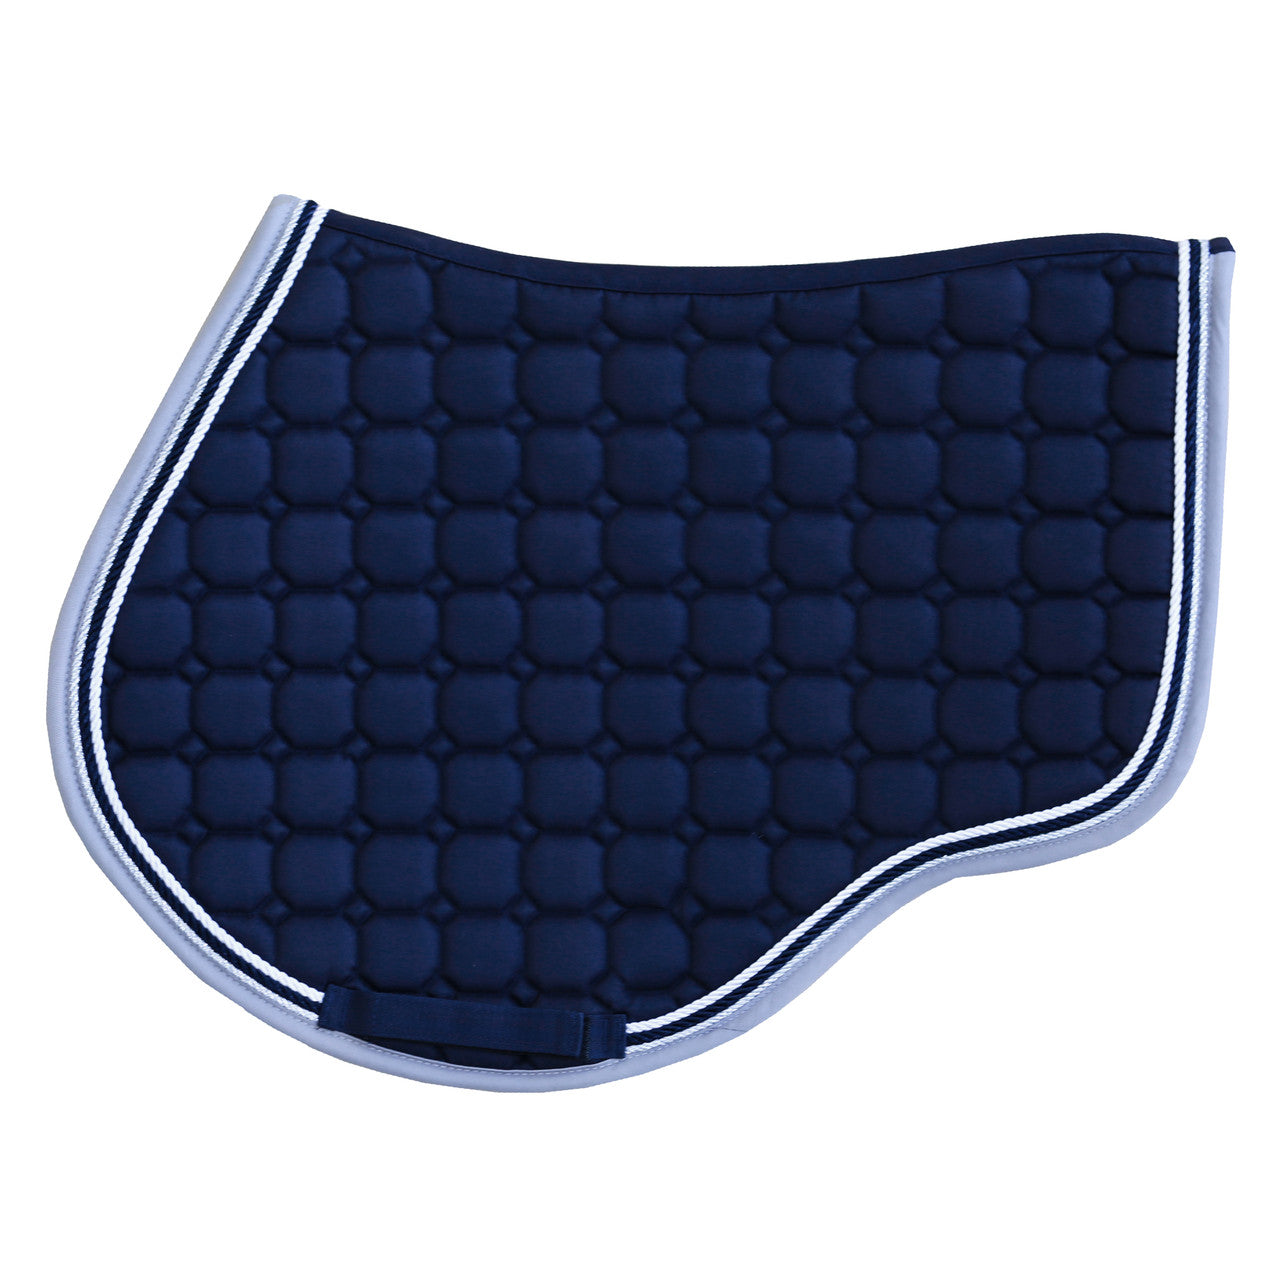 AP Saddle Pad - Navy / Grey w White, Navy and Silver Cord